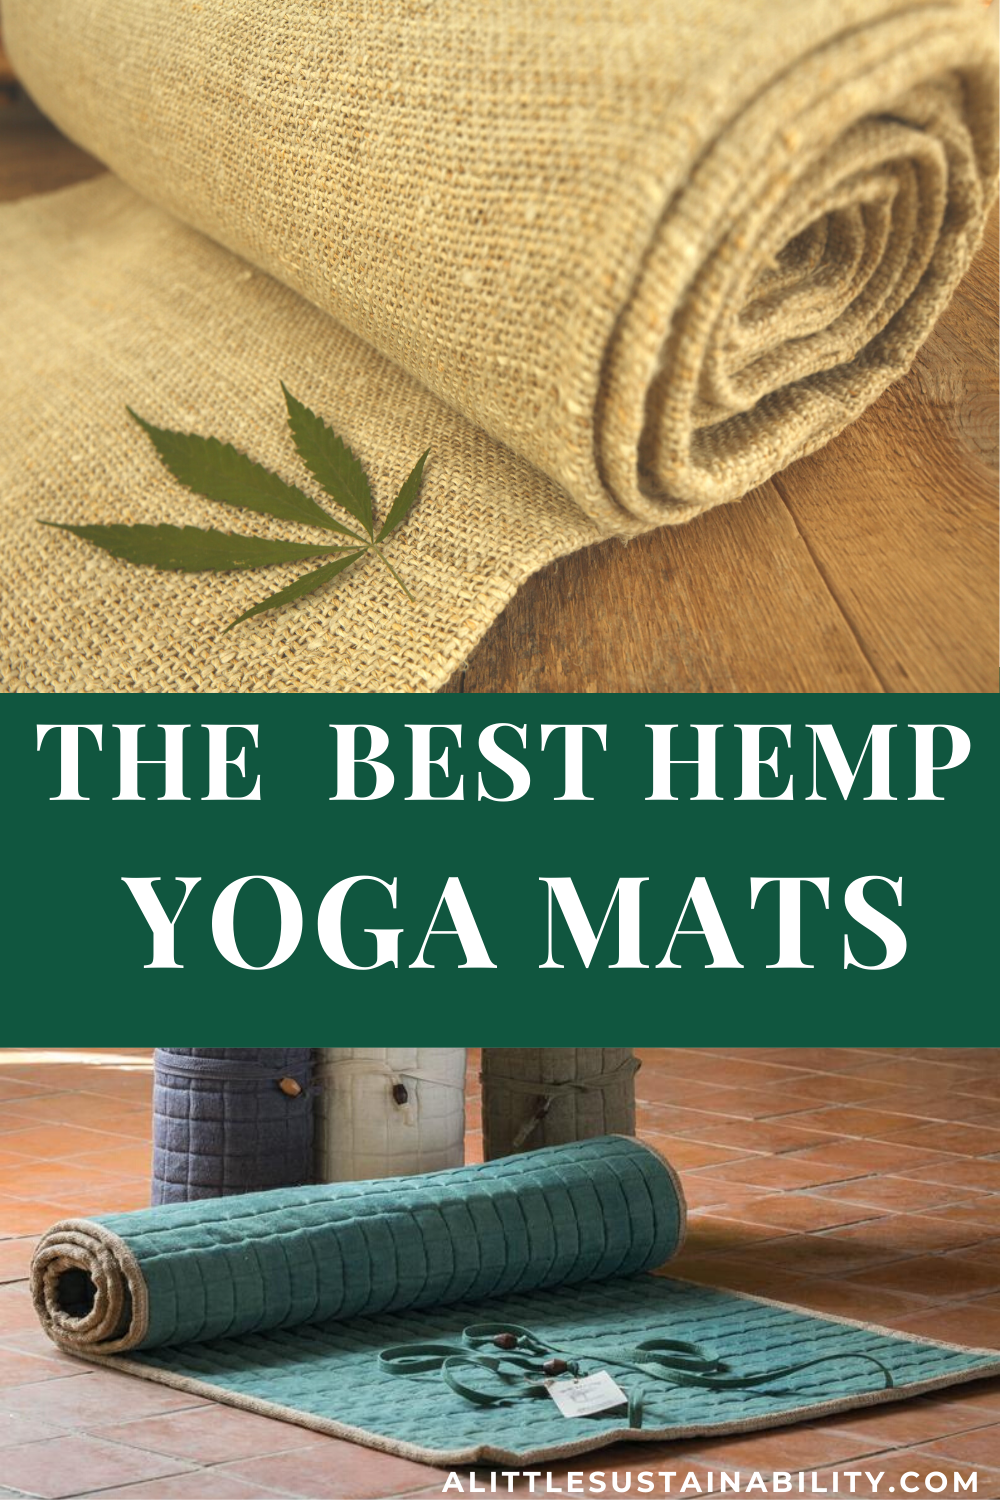 Hemp yoga mats are the most eco-friendly and sustainable option for yoga mats. Yoga mats are normally made with foam and rubber that aren’t sustainable for the planet, but hemp yoga mats are extremely earth friendly. We’ve found 5 awesome hemp yoga mats on Etsy for you to align your yoga practice with your sustainable living values. Learn more at www.alittlesustainability.com